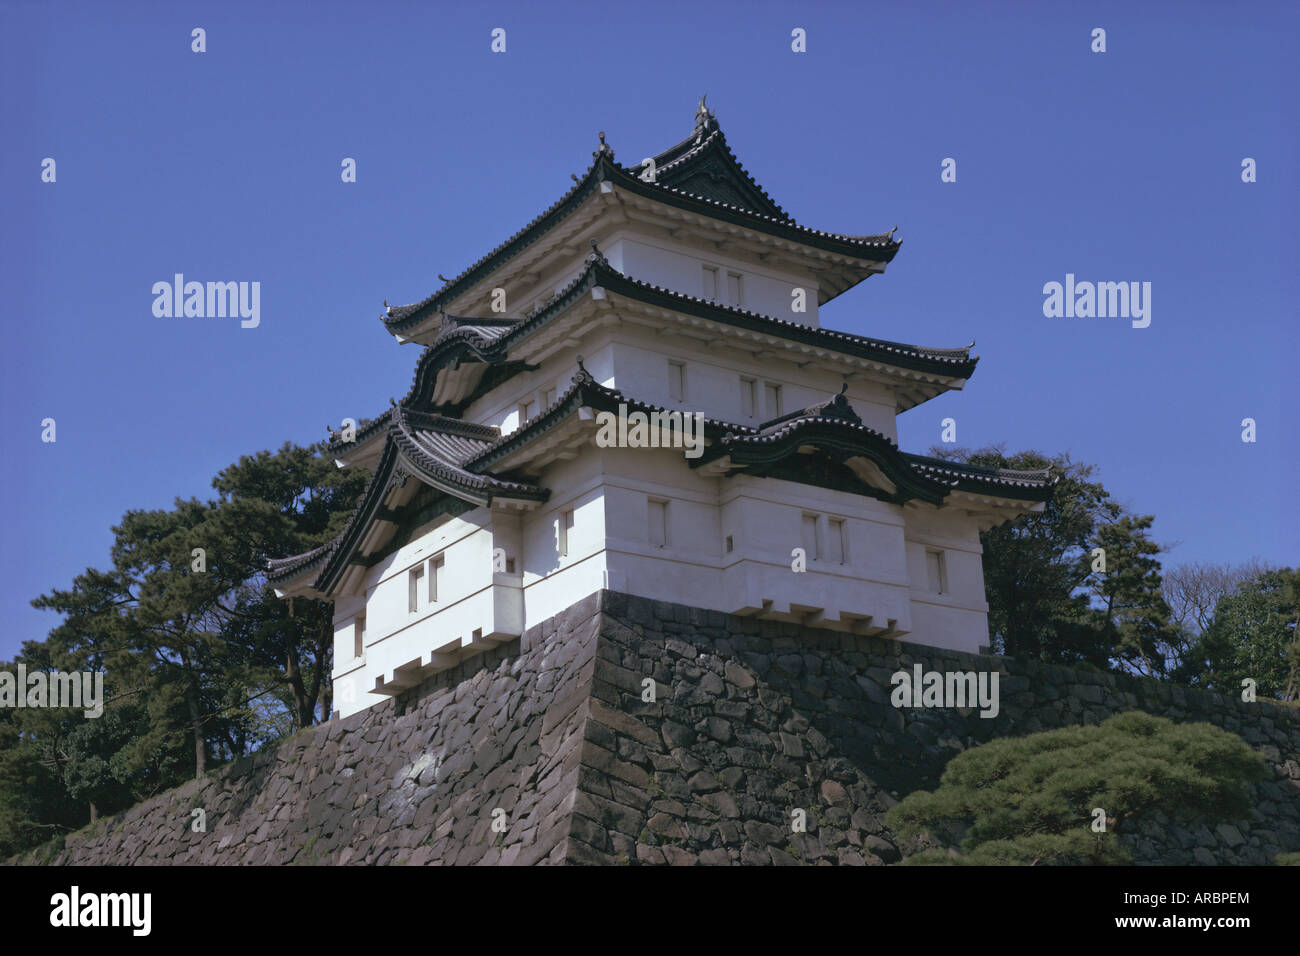 Part of the Imperial Palace, Tokyo, Japan, Asia Stock Photo